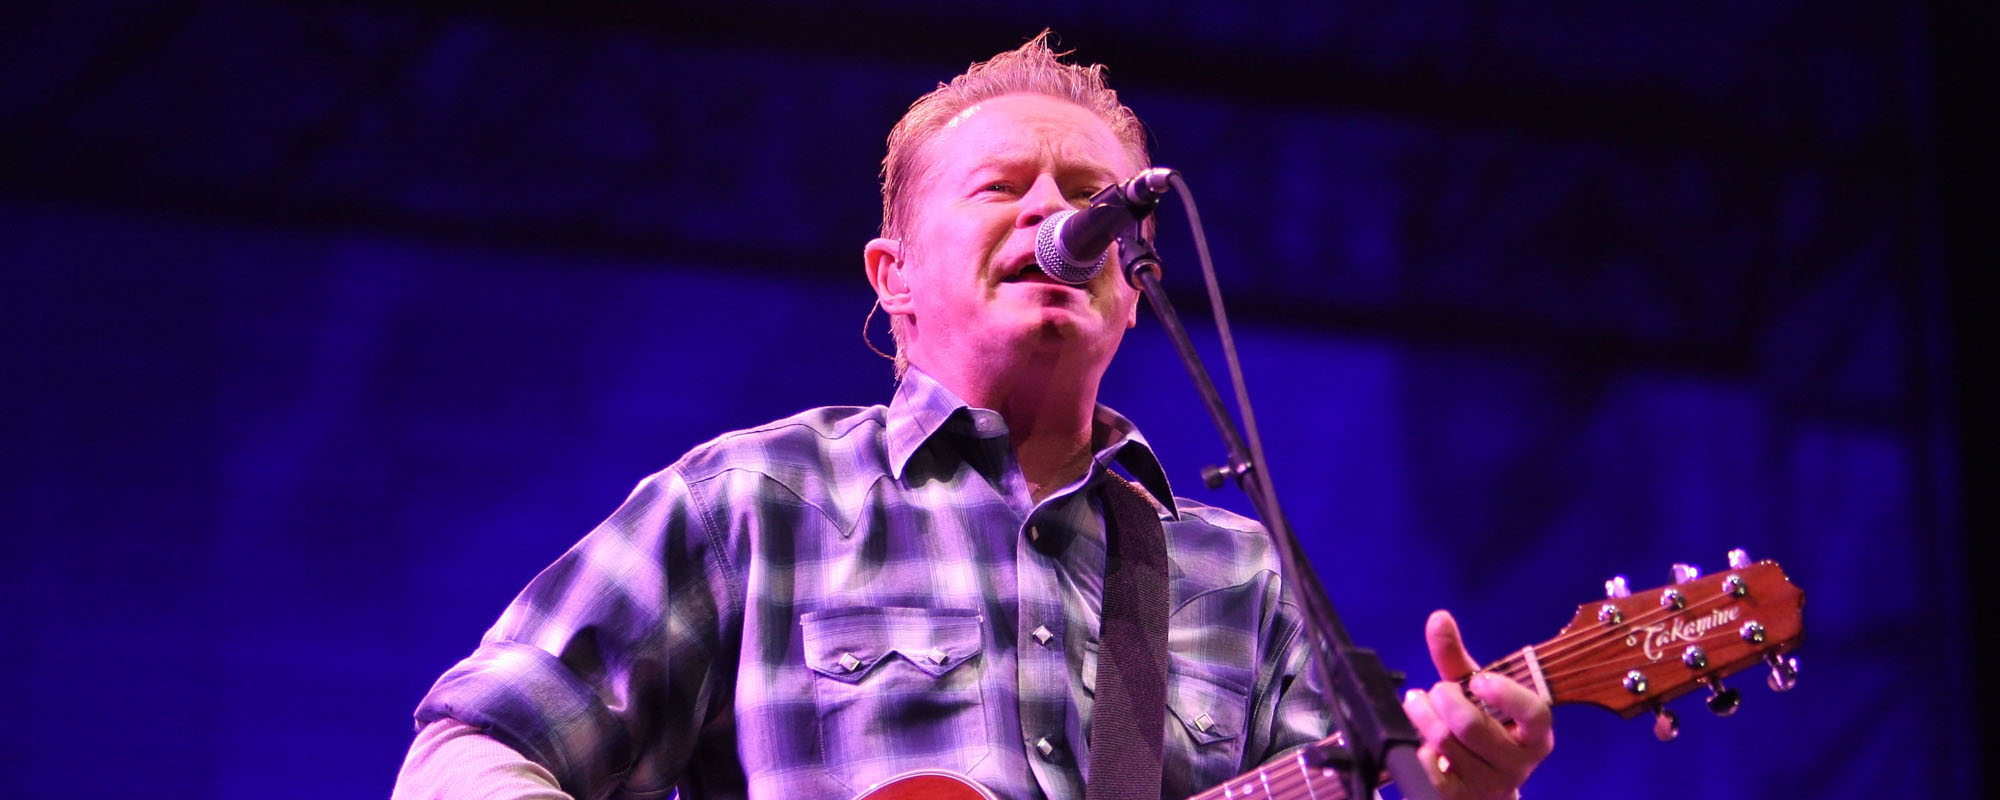 Don Henley’s Favorite Singer May Not Be What You’d Expect